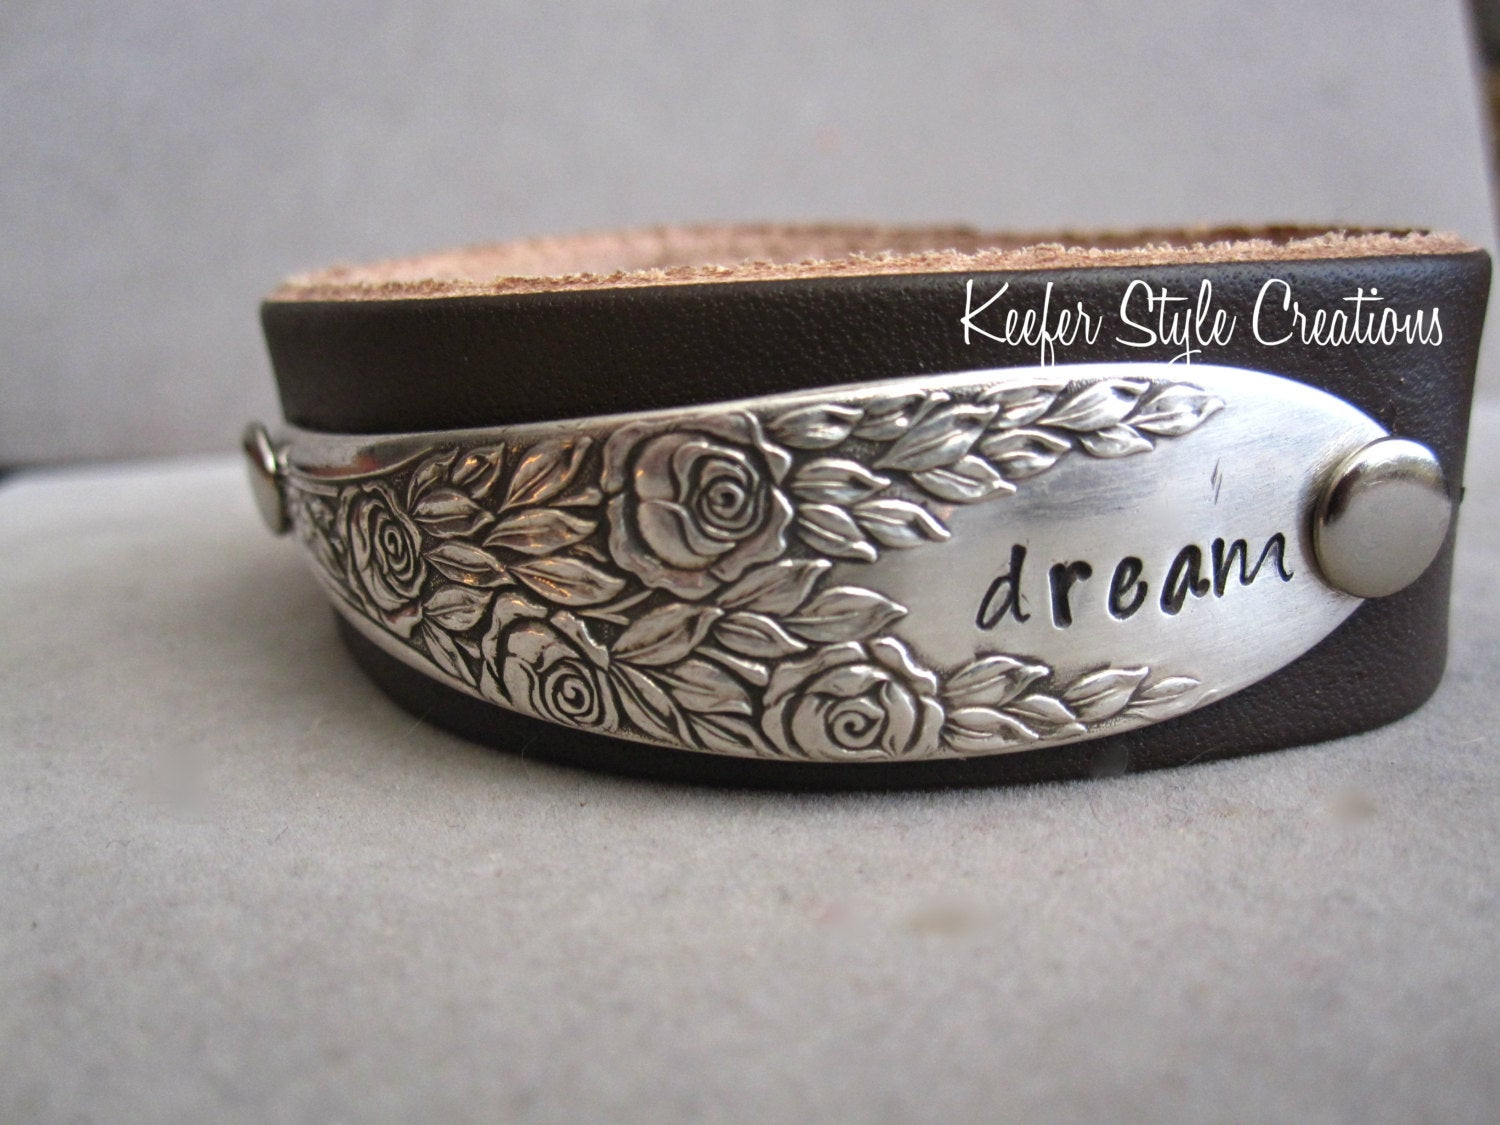 Stamped Leather Bracelet
 Spoon Hand Stamped Dream Leather Cuff Bracelet